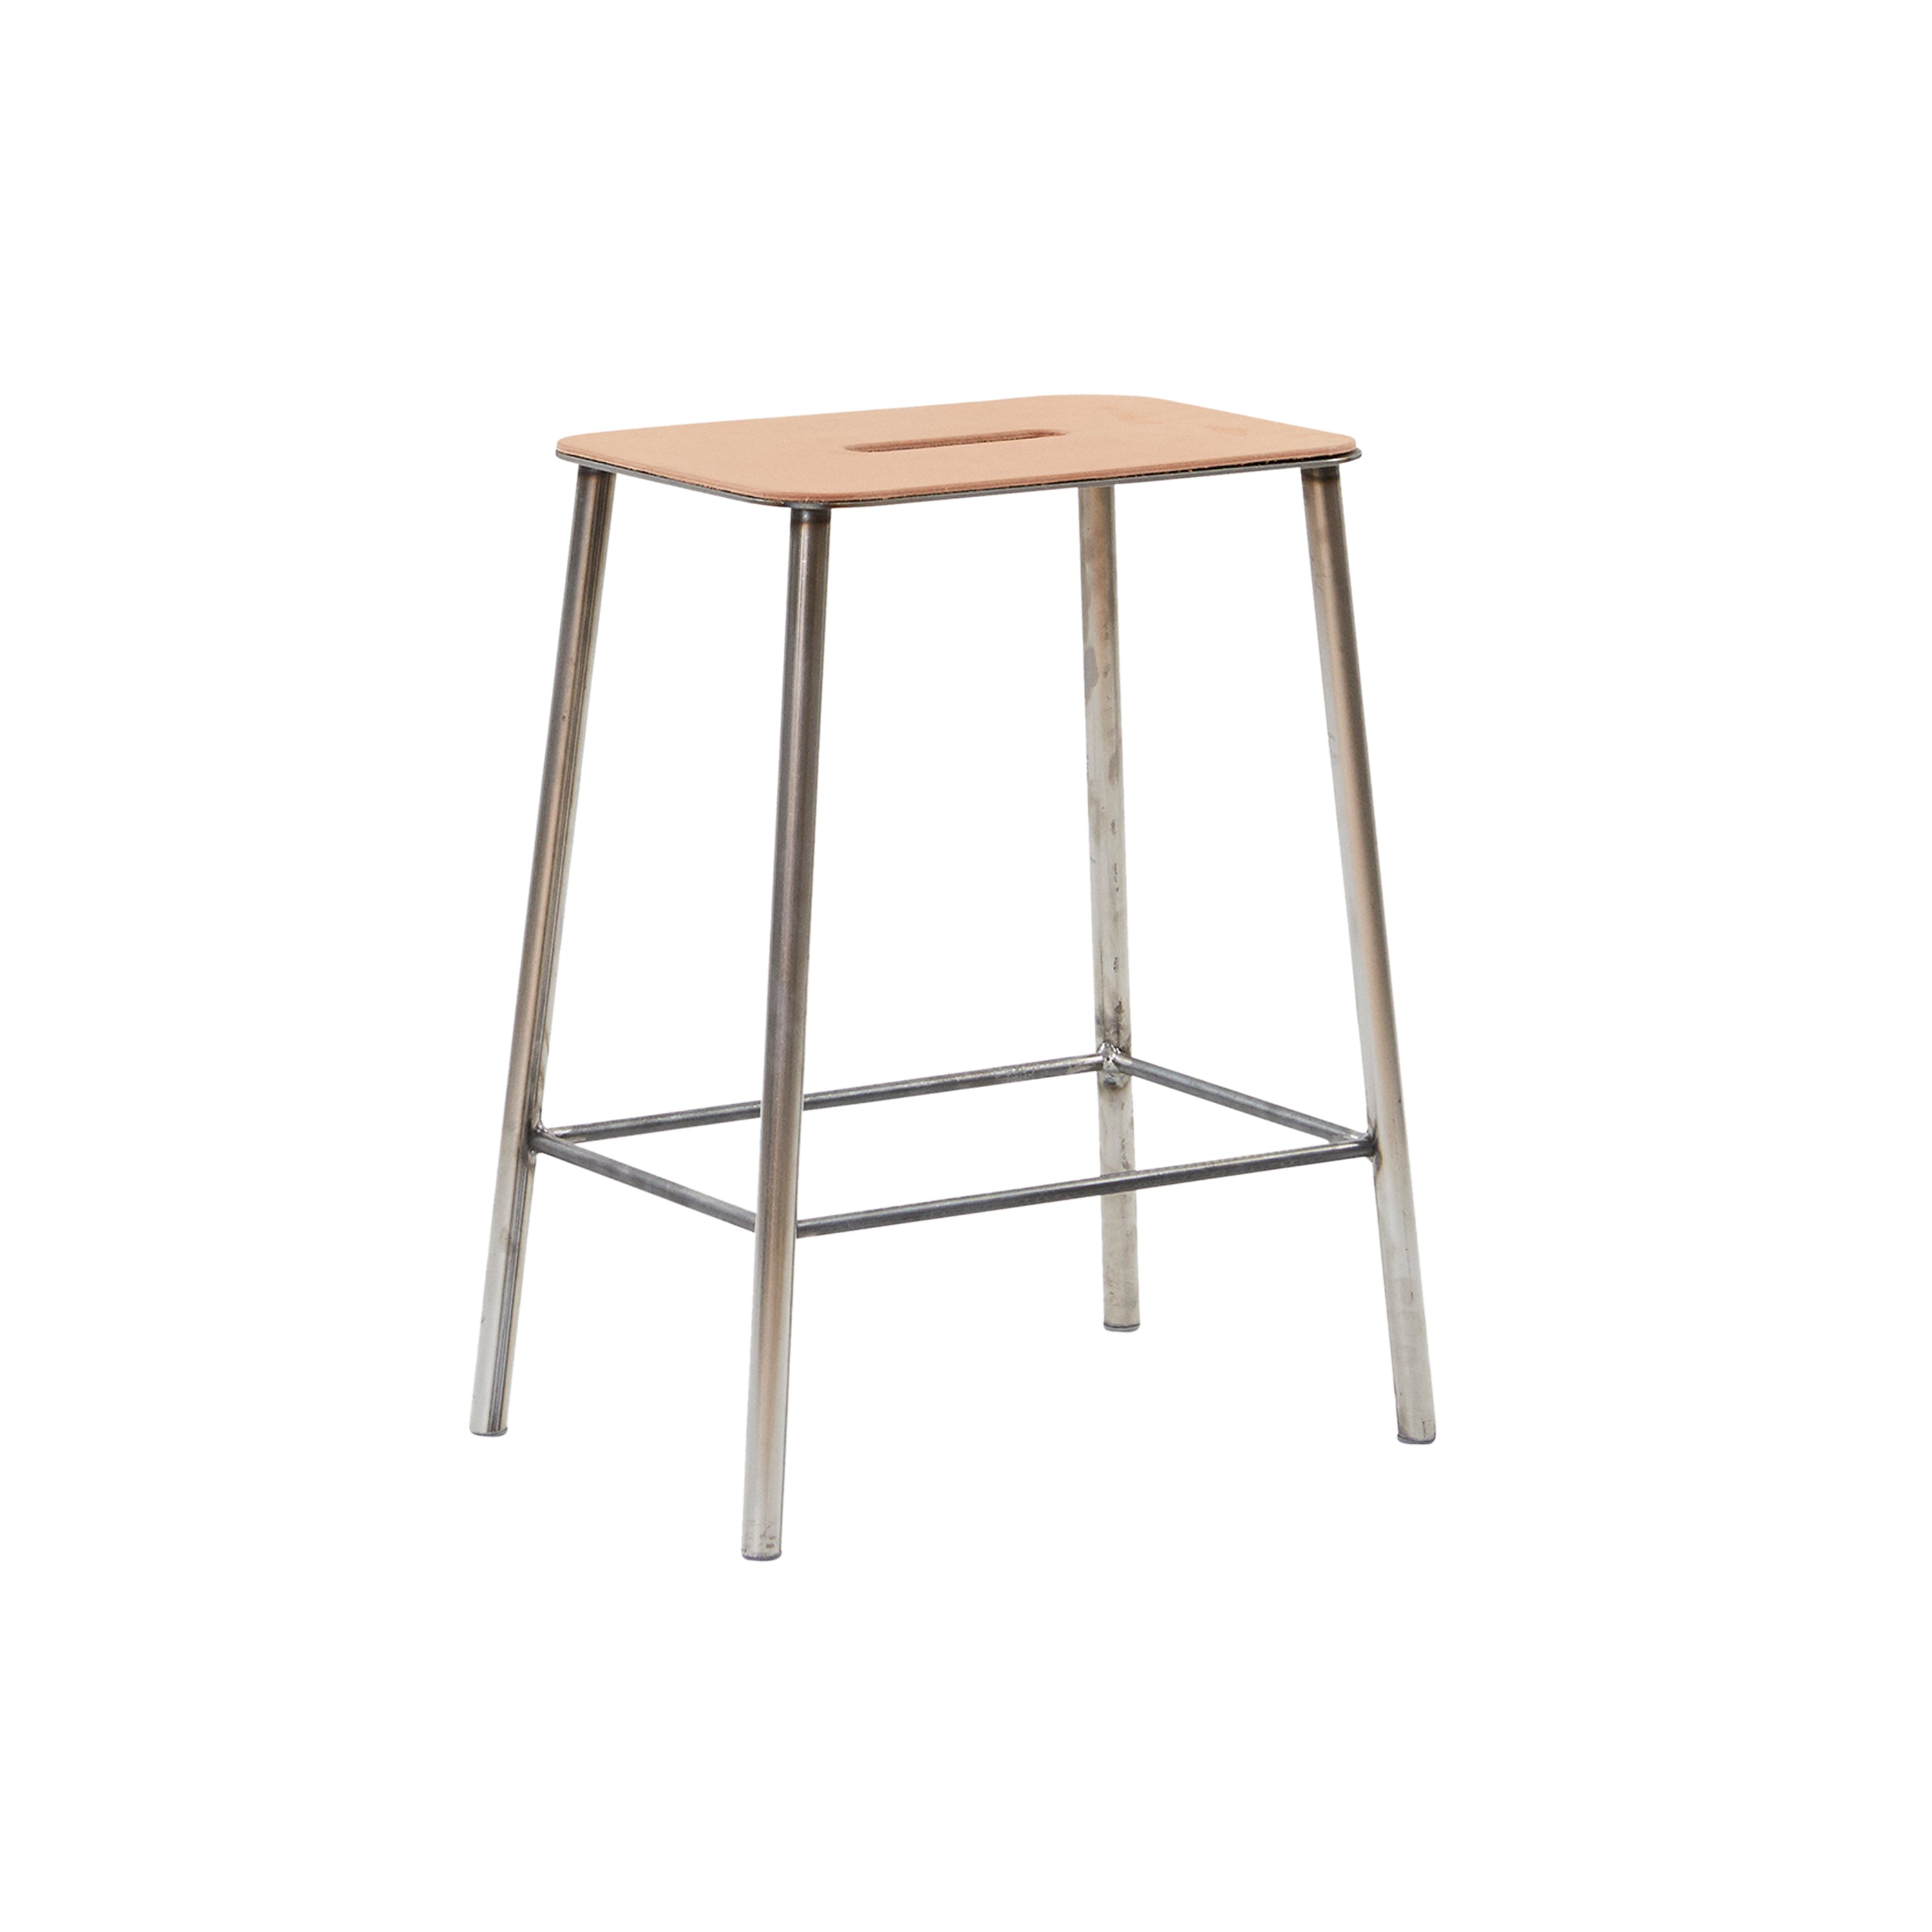 Adam Stool: Upholstered + Dining + Raw Steel + Natural Leather